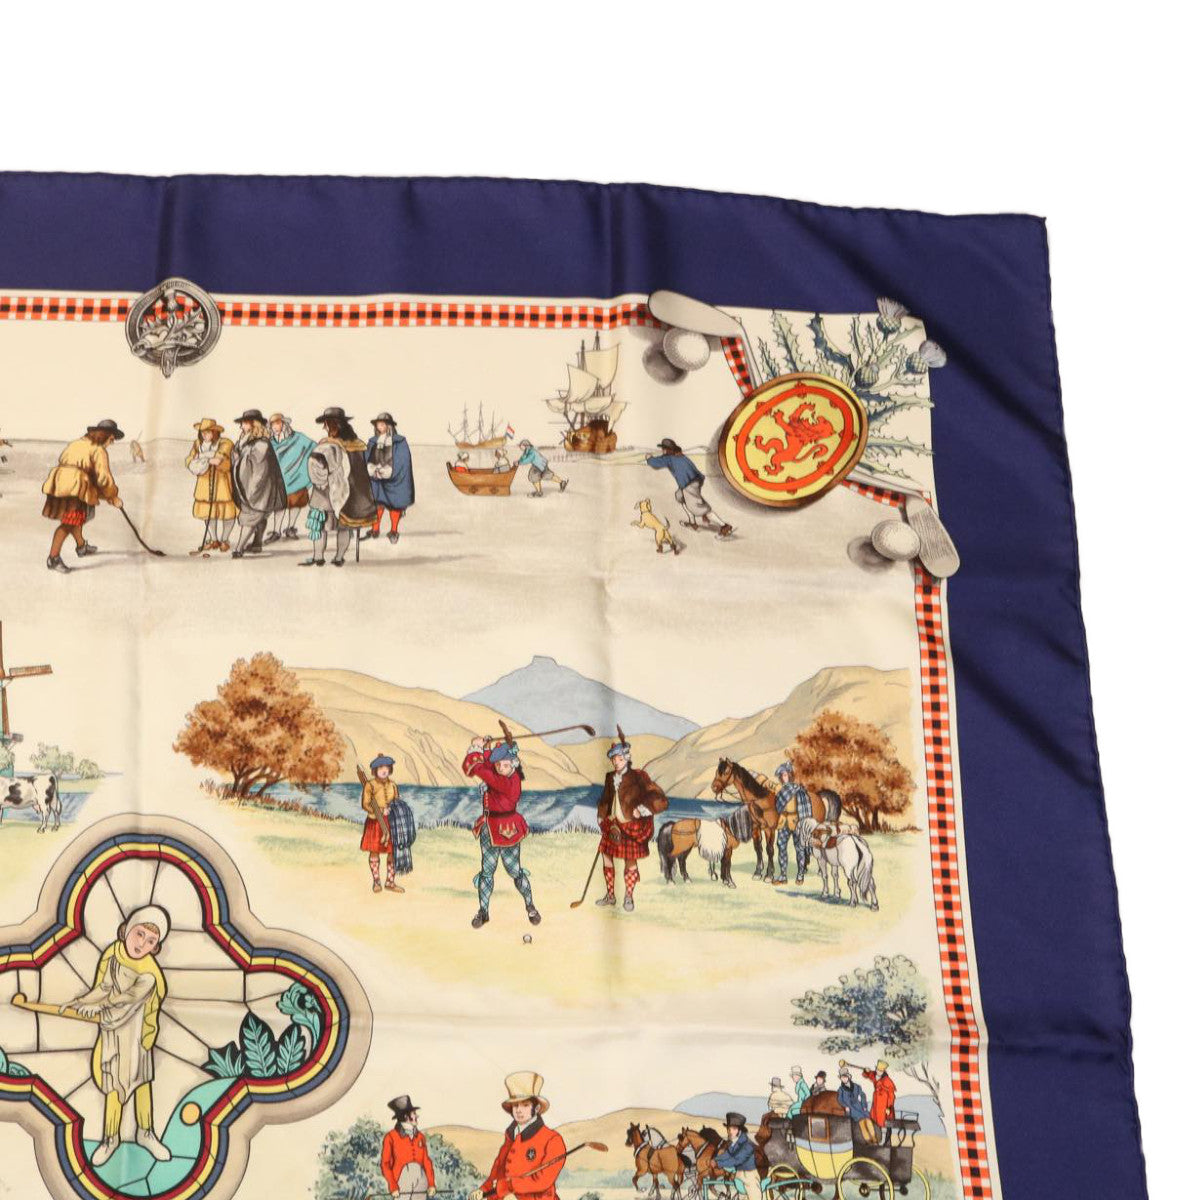 HERMES Carre 90 Scarf ""The ROYAL ANS ANCIENT GAME Of GOLF"" Silk Blue am2543g